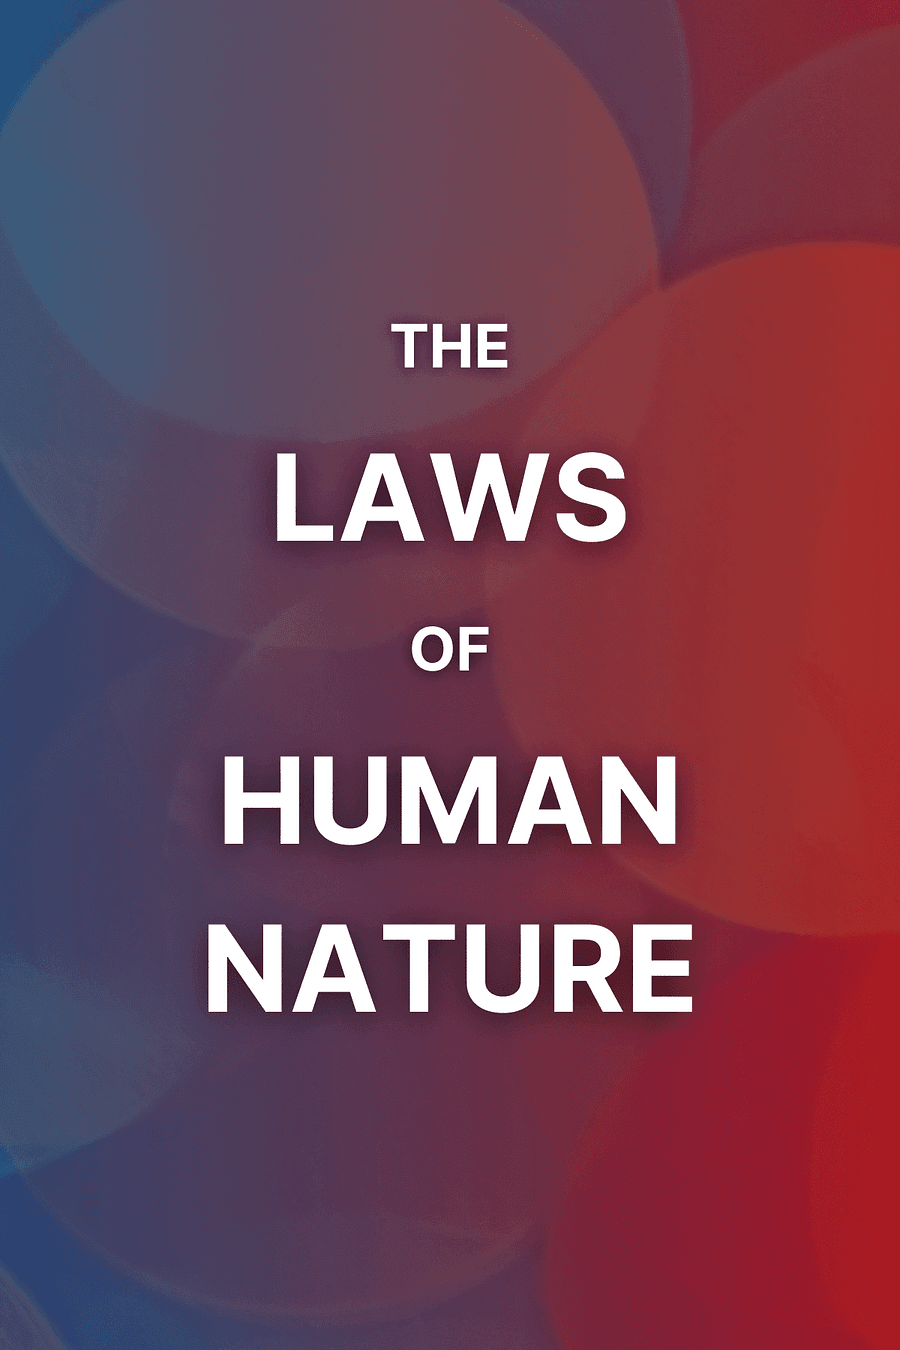 The Laws of Human Nature by Robert Greene - Book Summary